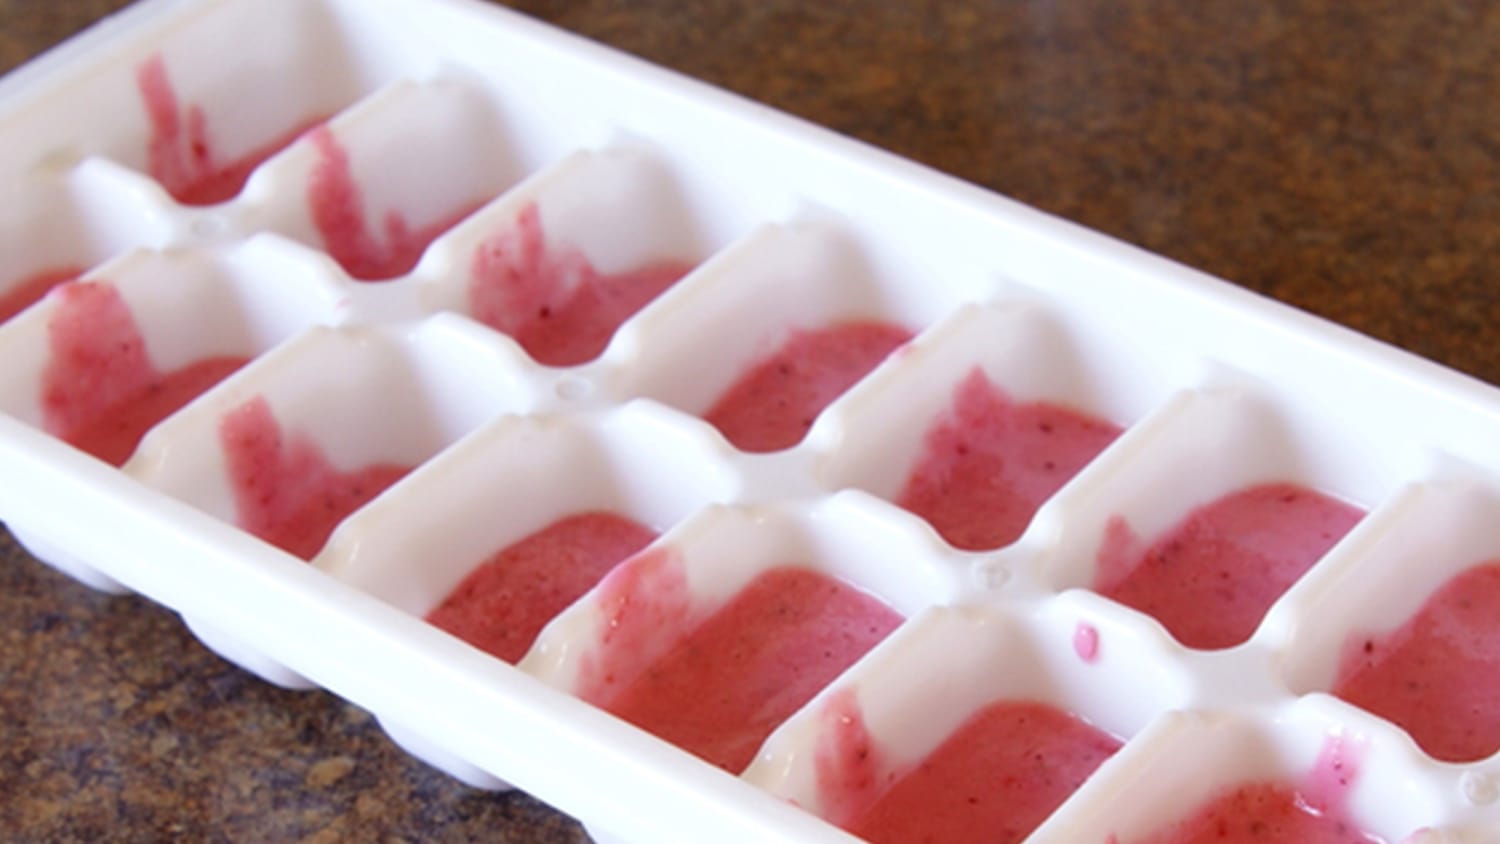 Tons of Fun Ways to Use a Stainless Ice Cube Tray